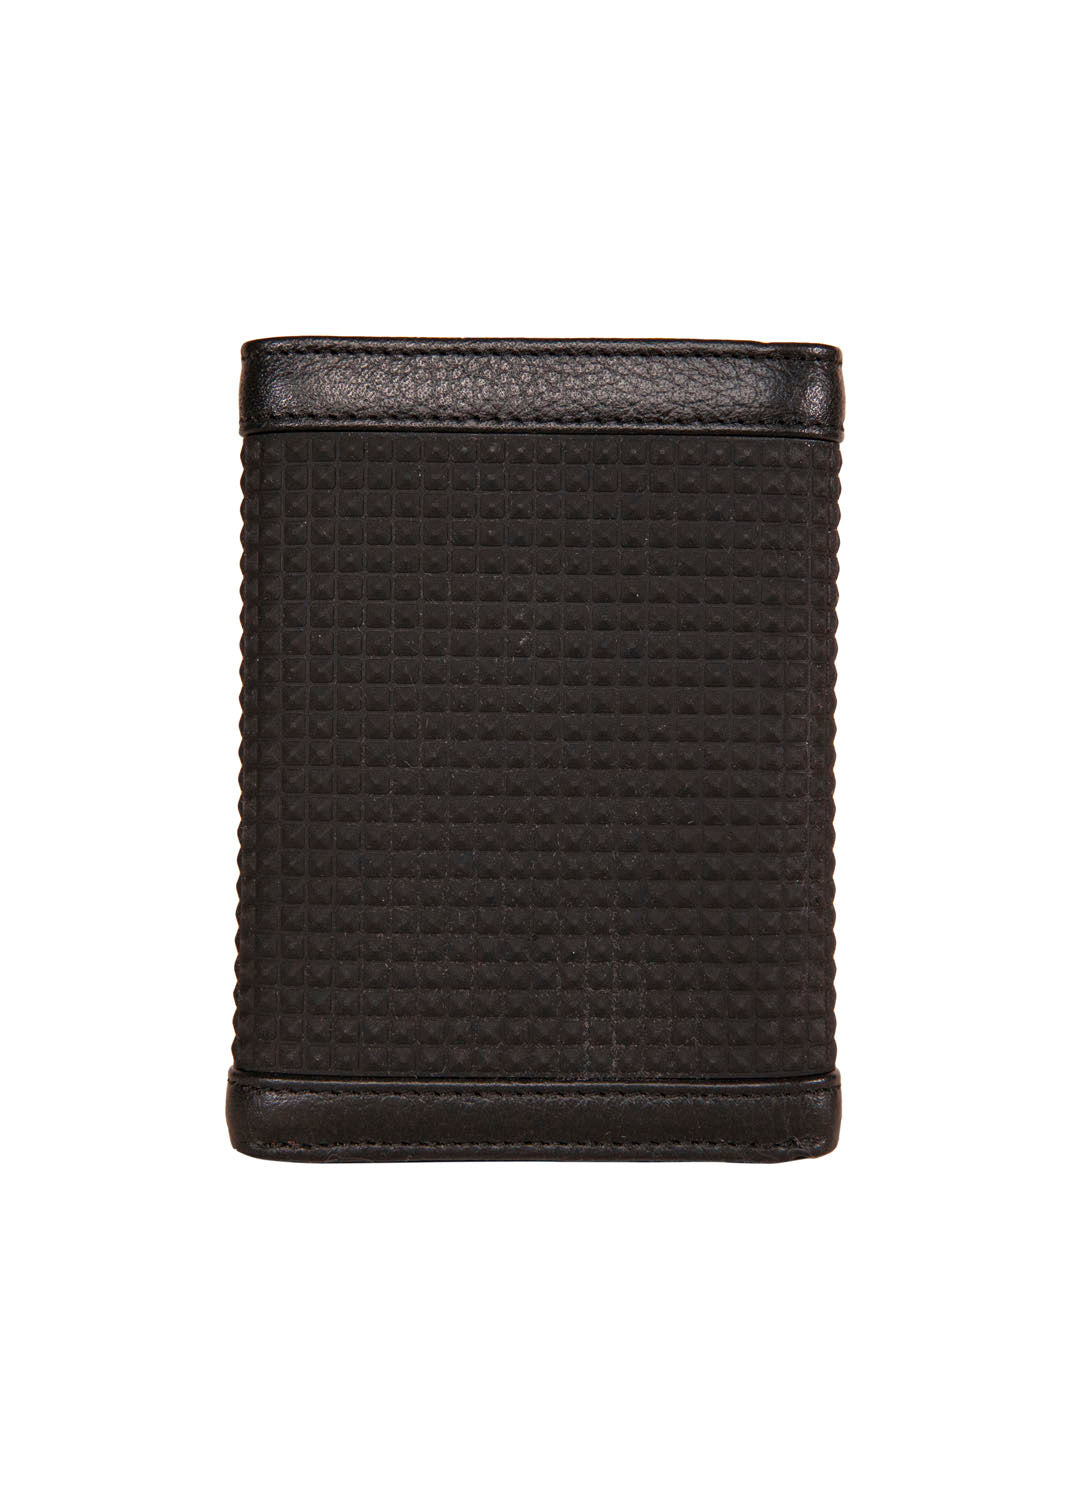 NAUTICA LOGO RUBBER / LEATHER TRIFOLD WALLET